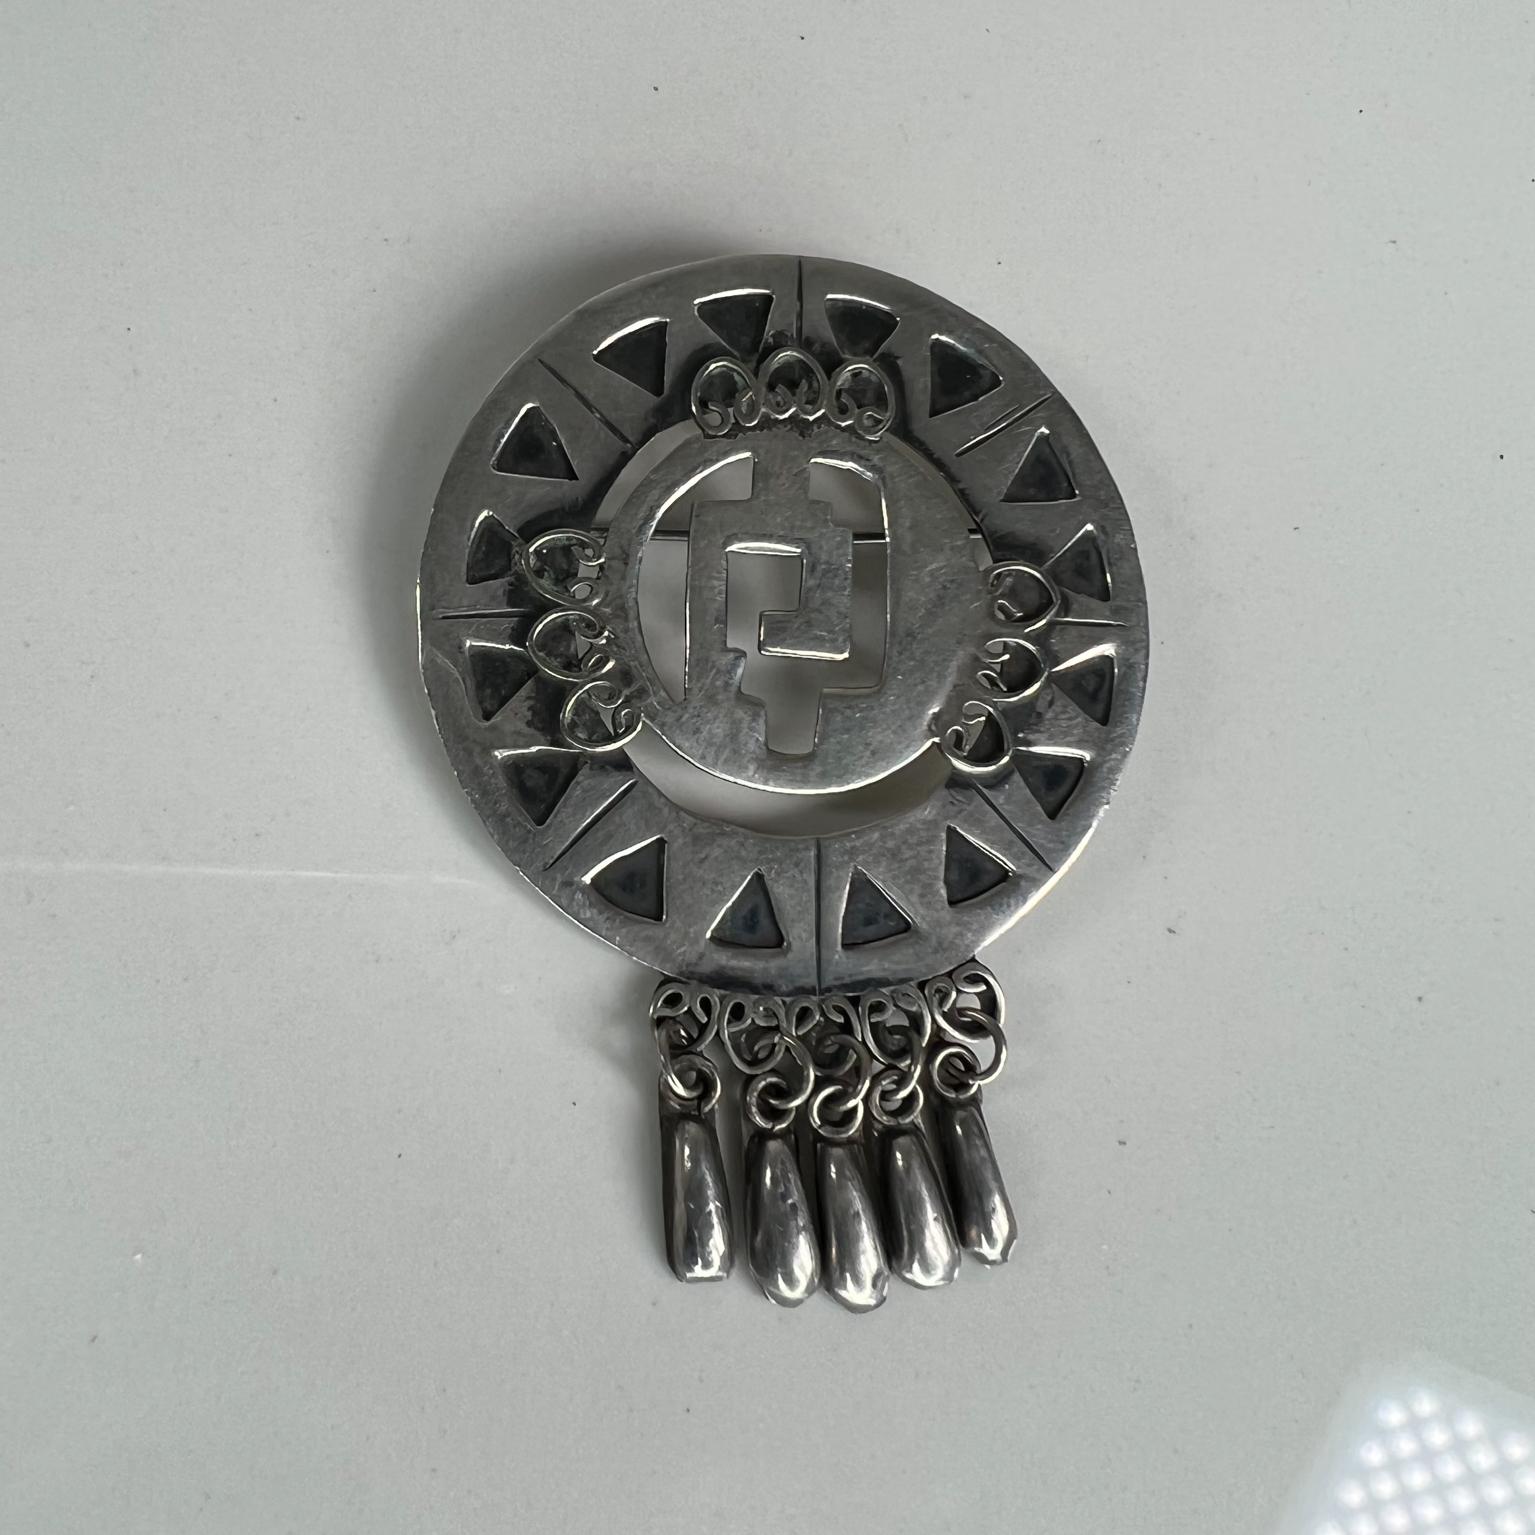 1950s Vintage Native sterling silver brooch pendant Aztec Pin Made in Mexico
Maker Stamped from Mexico
2 w x 2.5 tall x .13 thickness
Preowned original vintage condition
See images provided.




